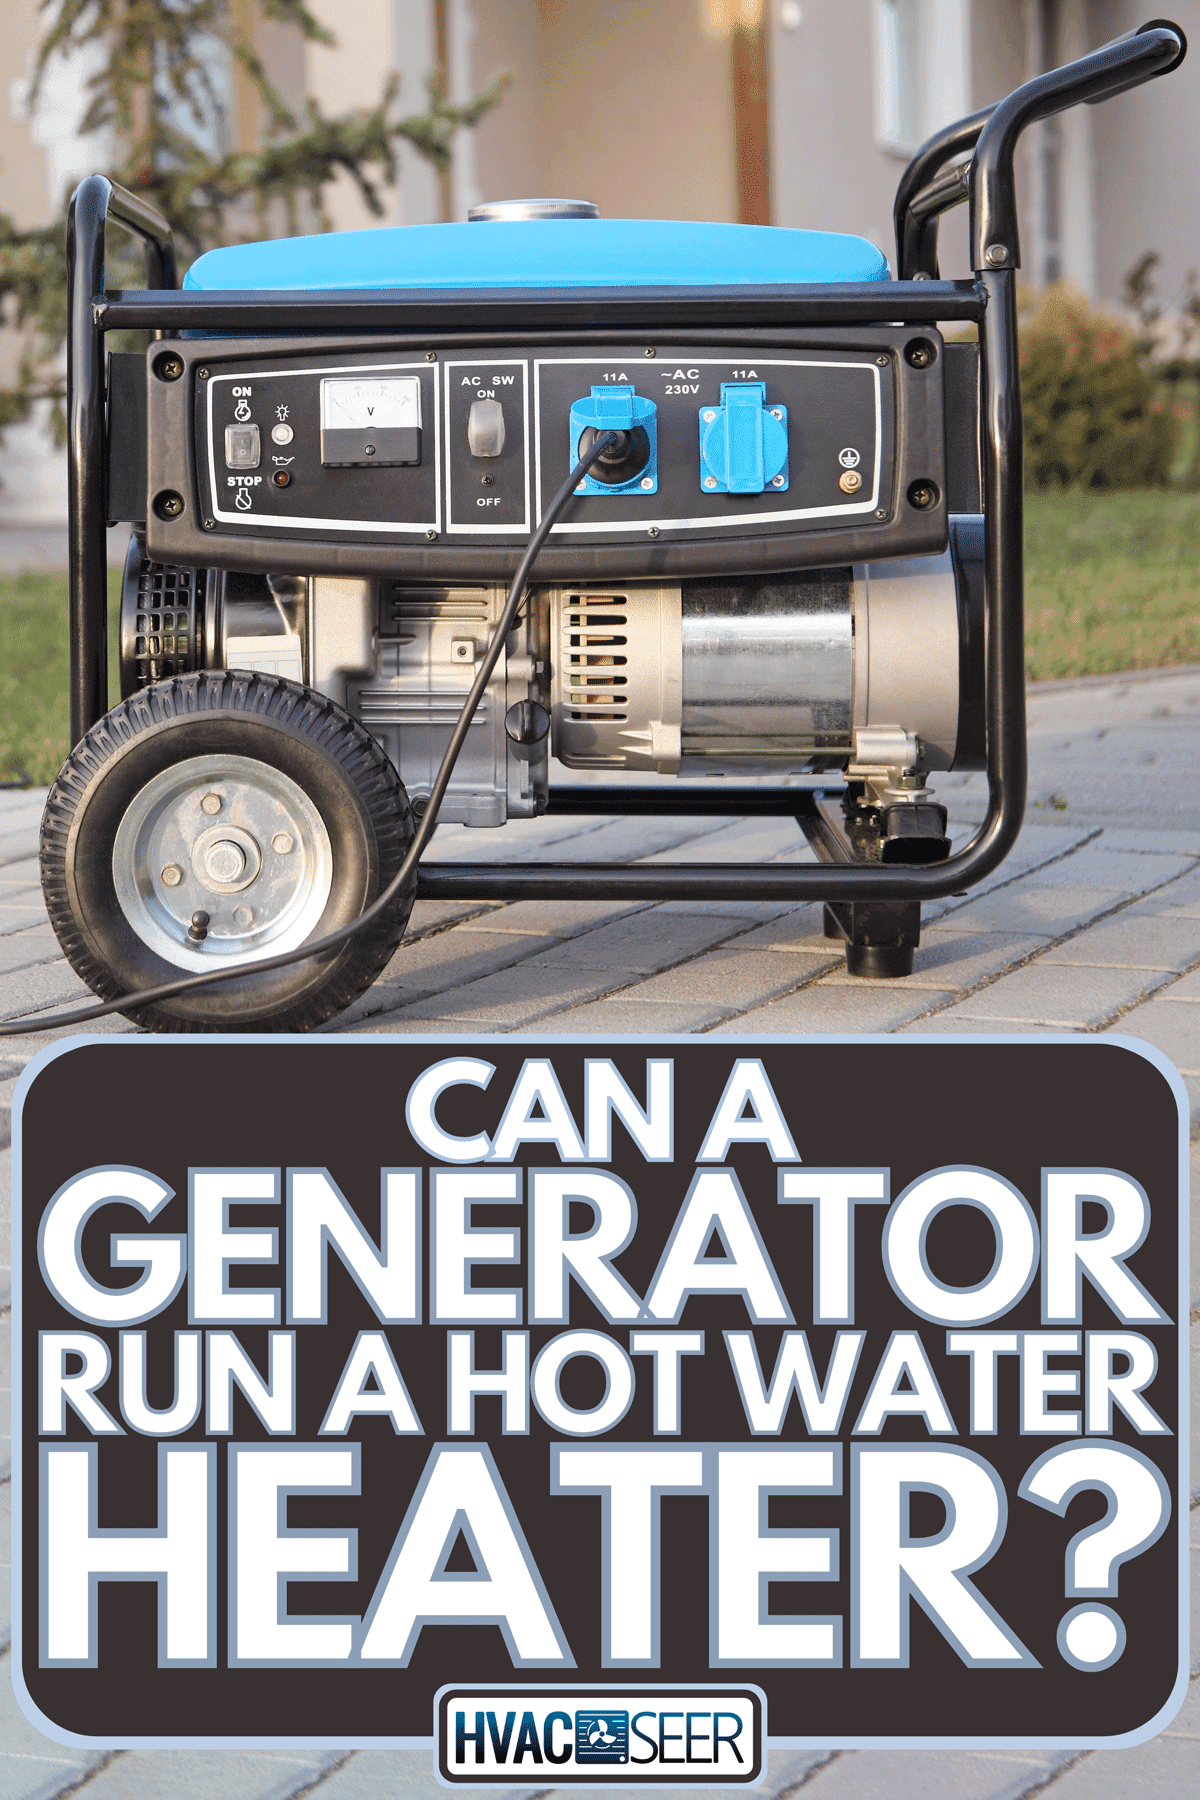 A gasoline powered portable generator at home, Can A Generator Run A Hot Water Heater?